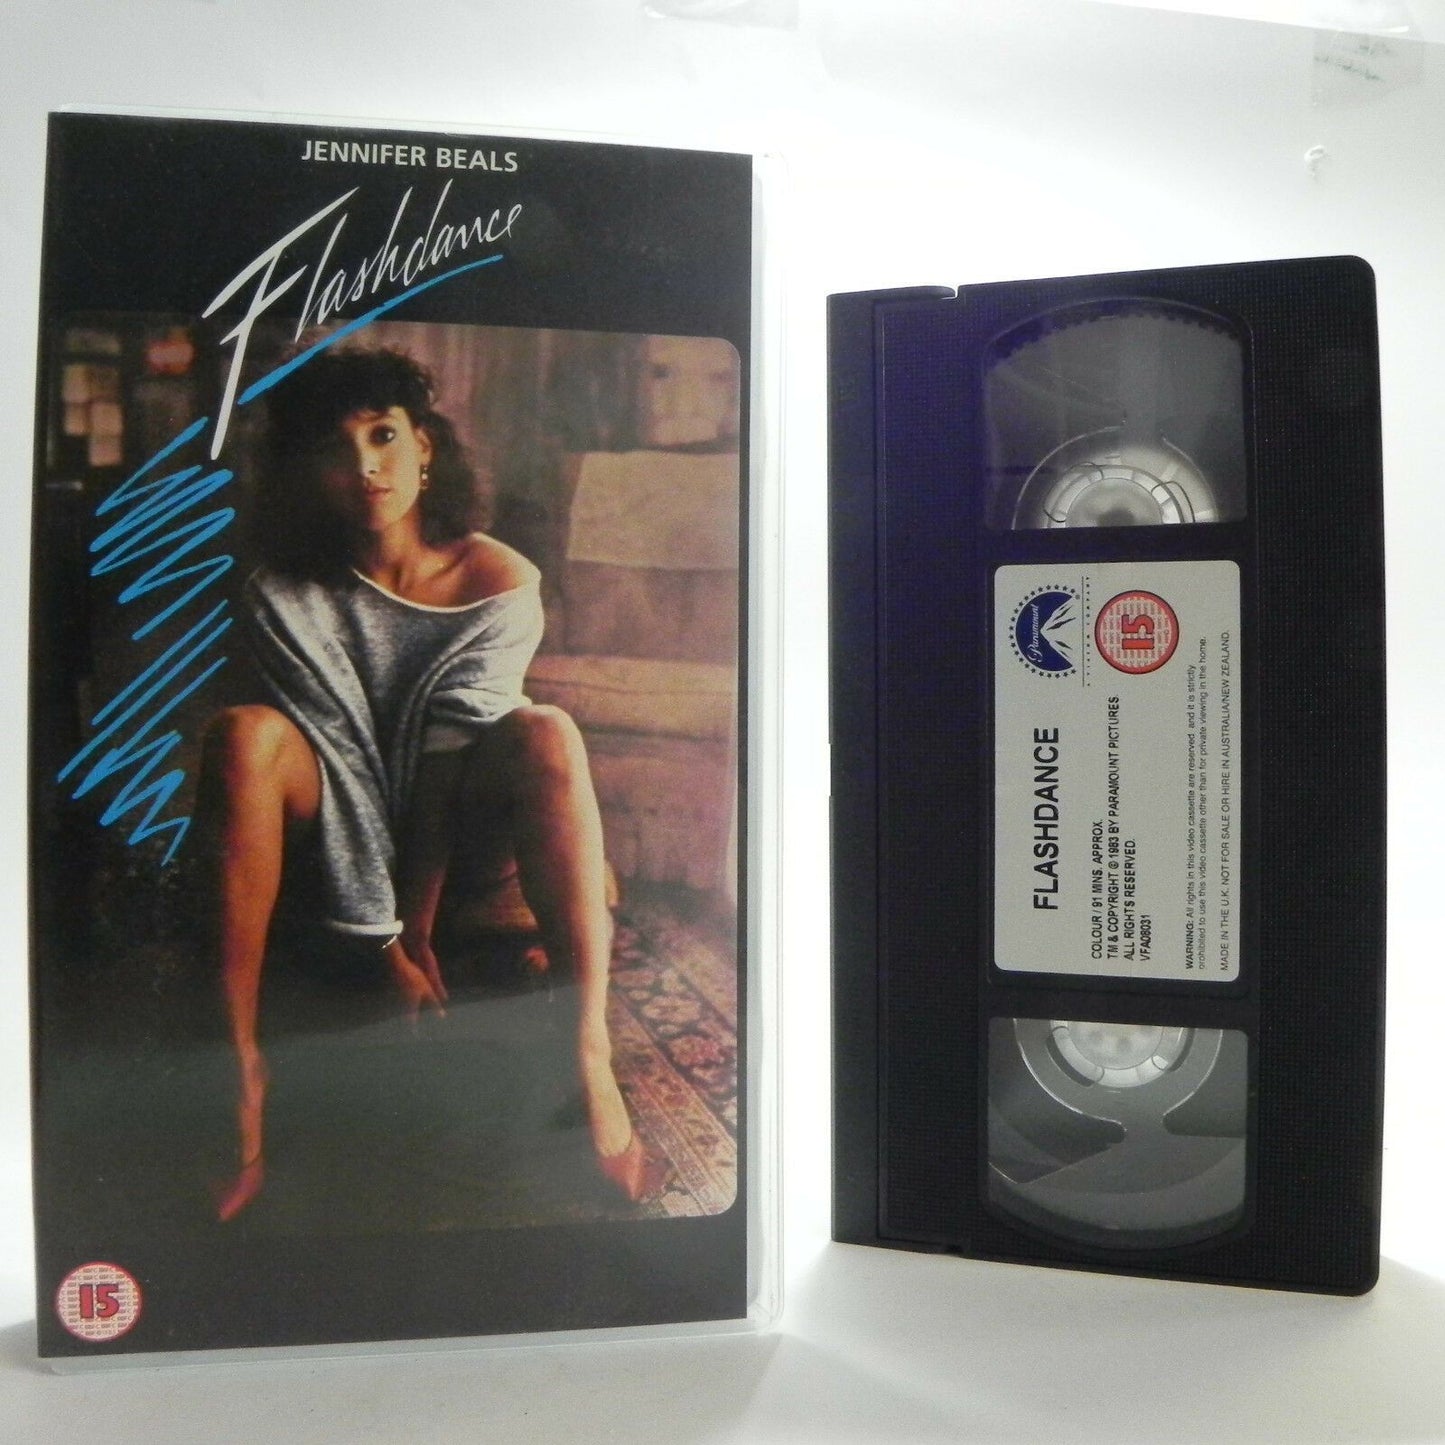 Flashdance: "What A Feeling" - (1983) Digitally Sourced/Dolby Surround - Pal VHS-